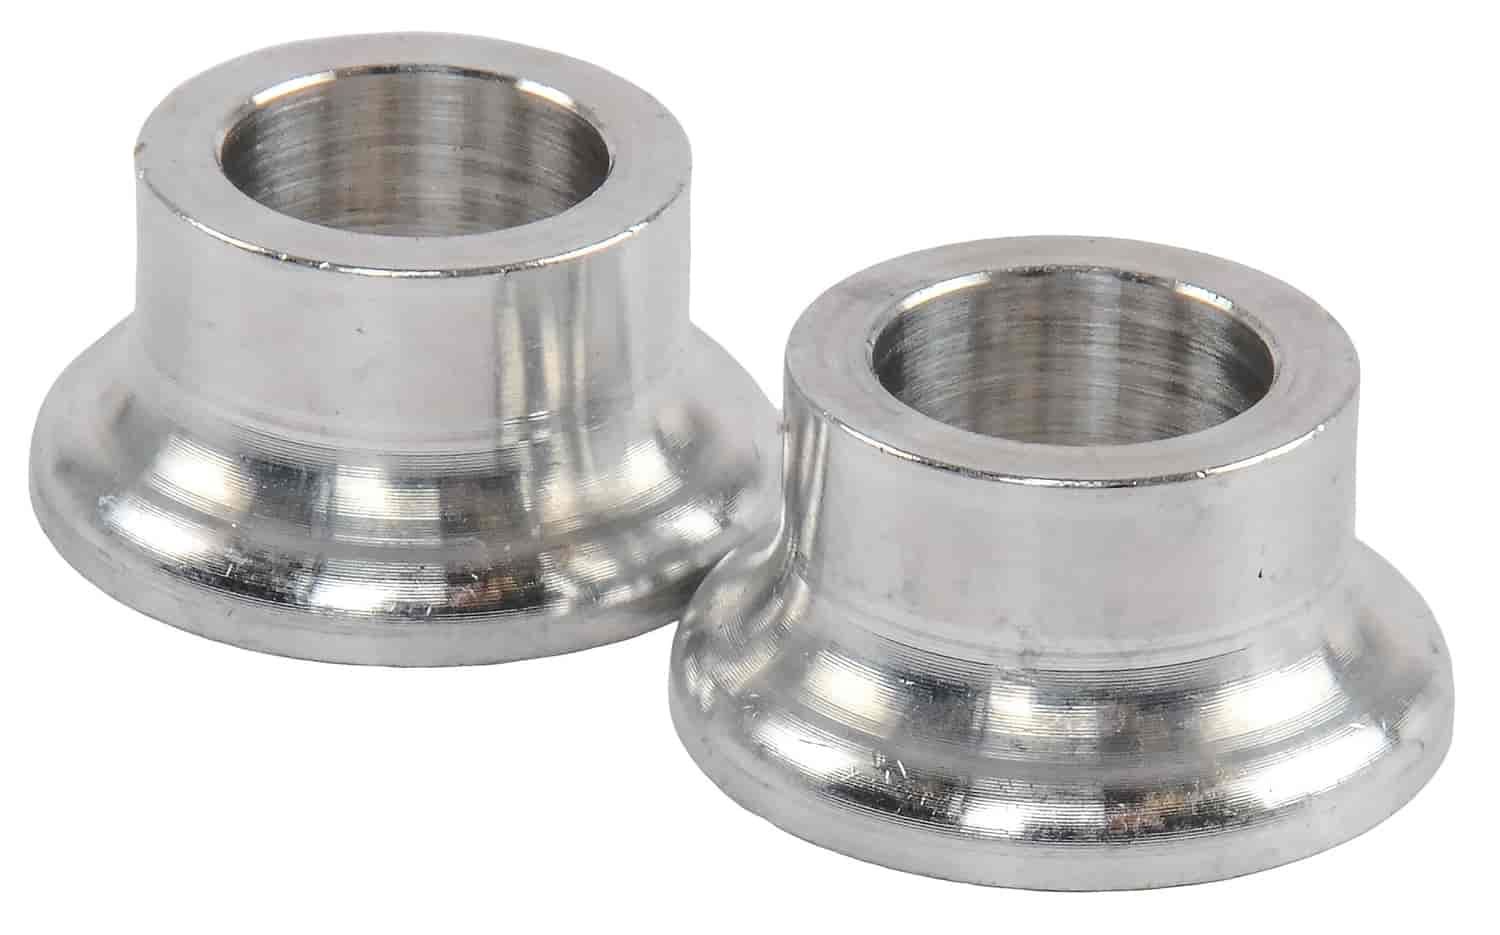 JEGS 64211: Aluminum Tapered Rod End Spacers 1/2 in. ID (Bolt Size) x 1/2  in. L - JEGS